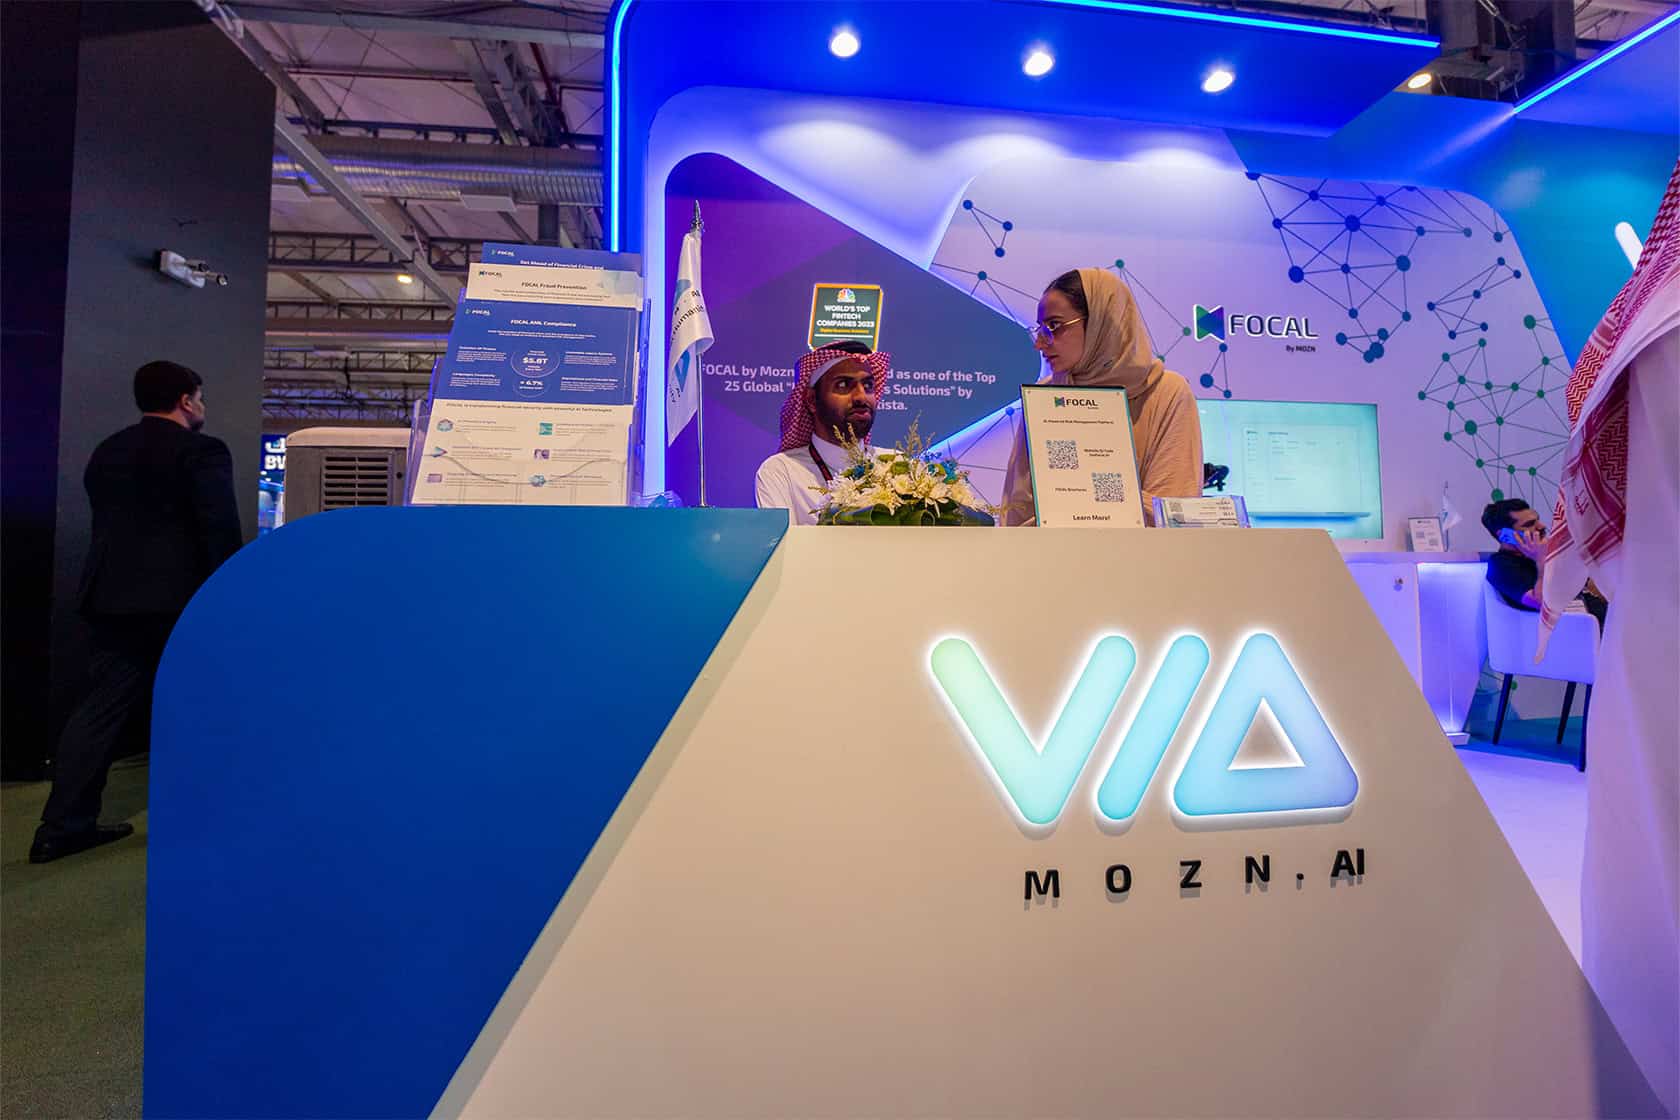 Mozn welcoming booth with people